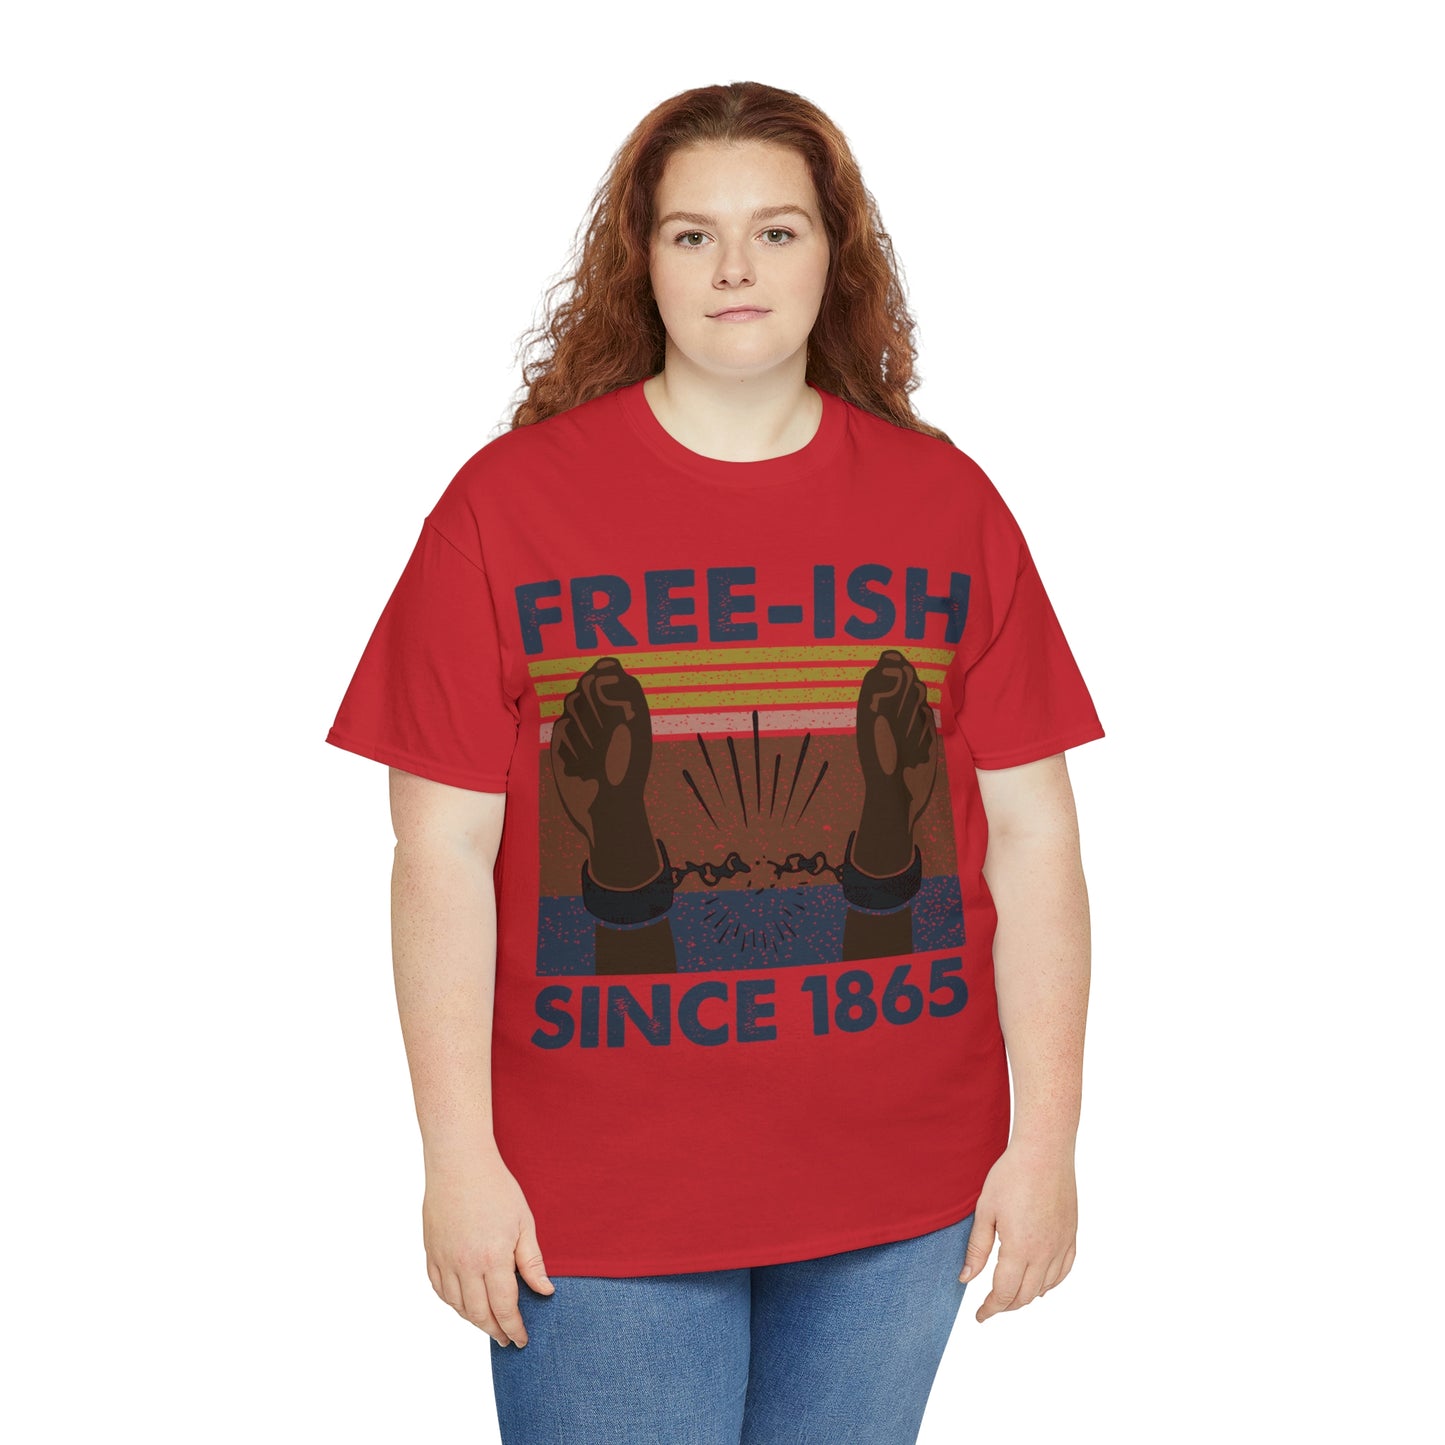 Free-ish since 1865 Shirt Up to 5X